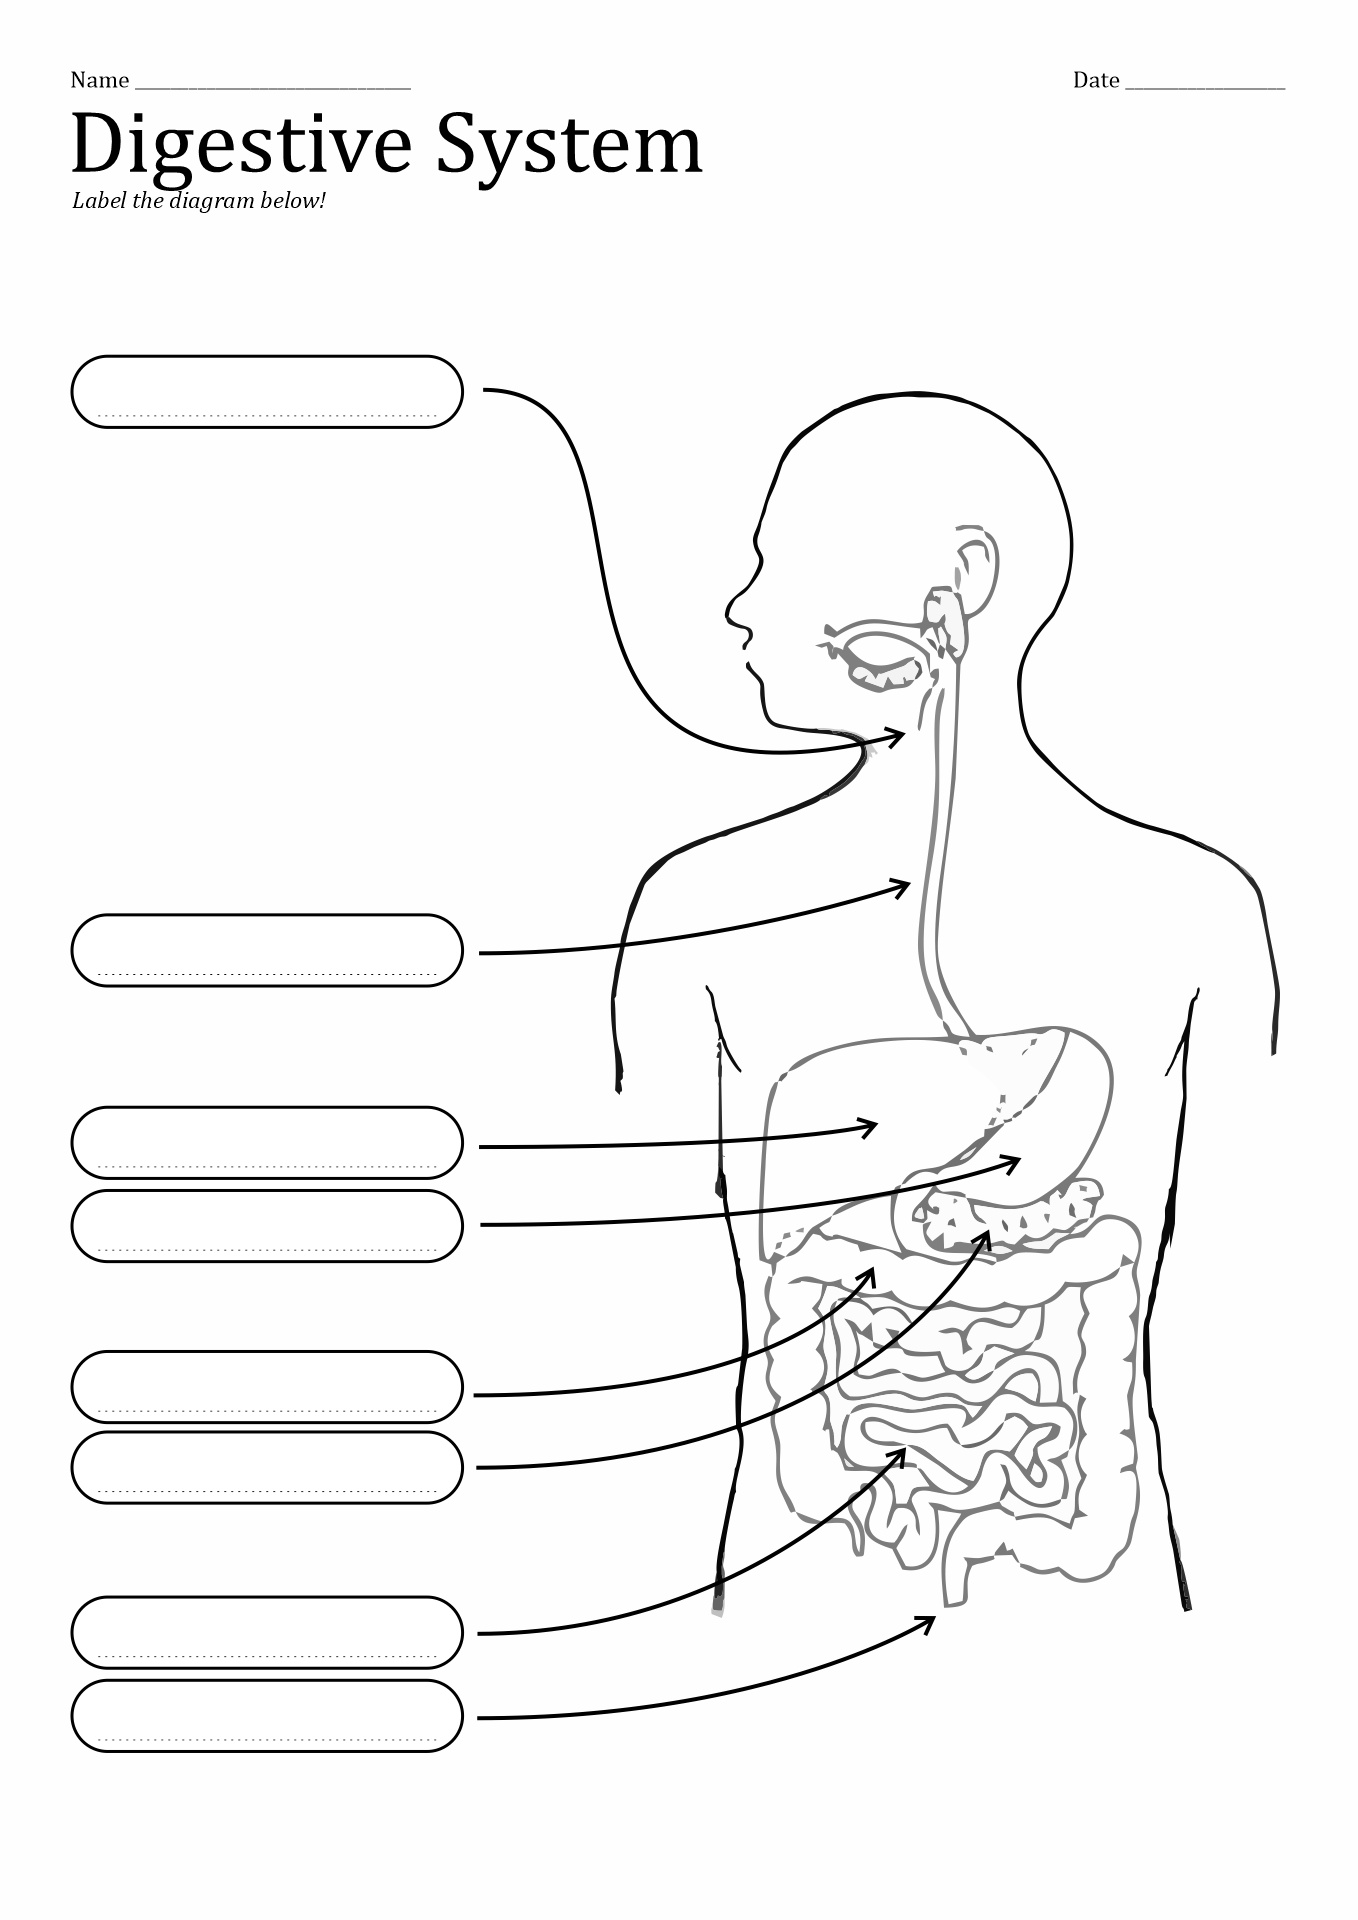 10 Best Images of Unlabeled Digestive System Diagram Worksheet - Small